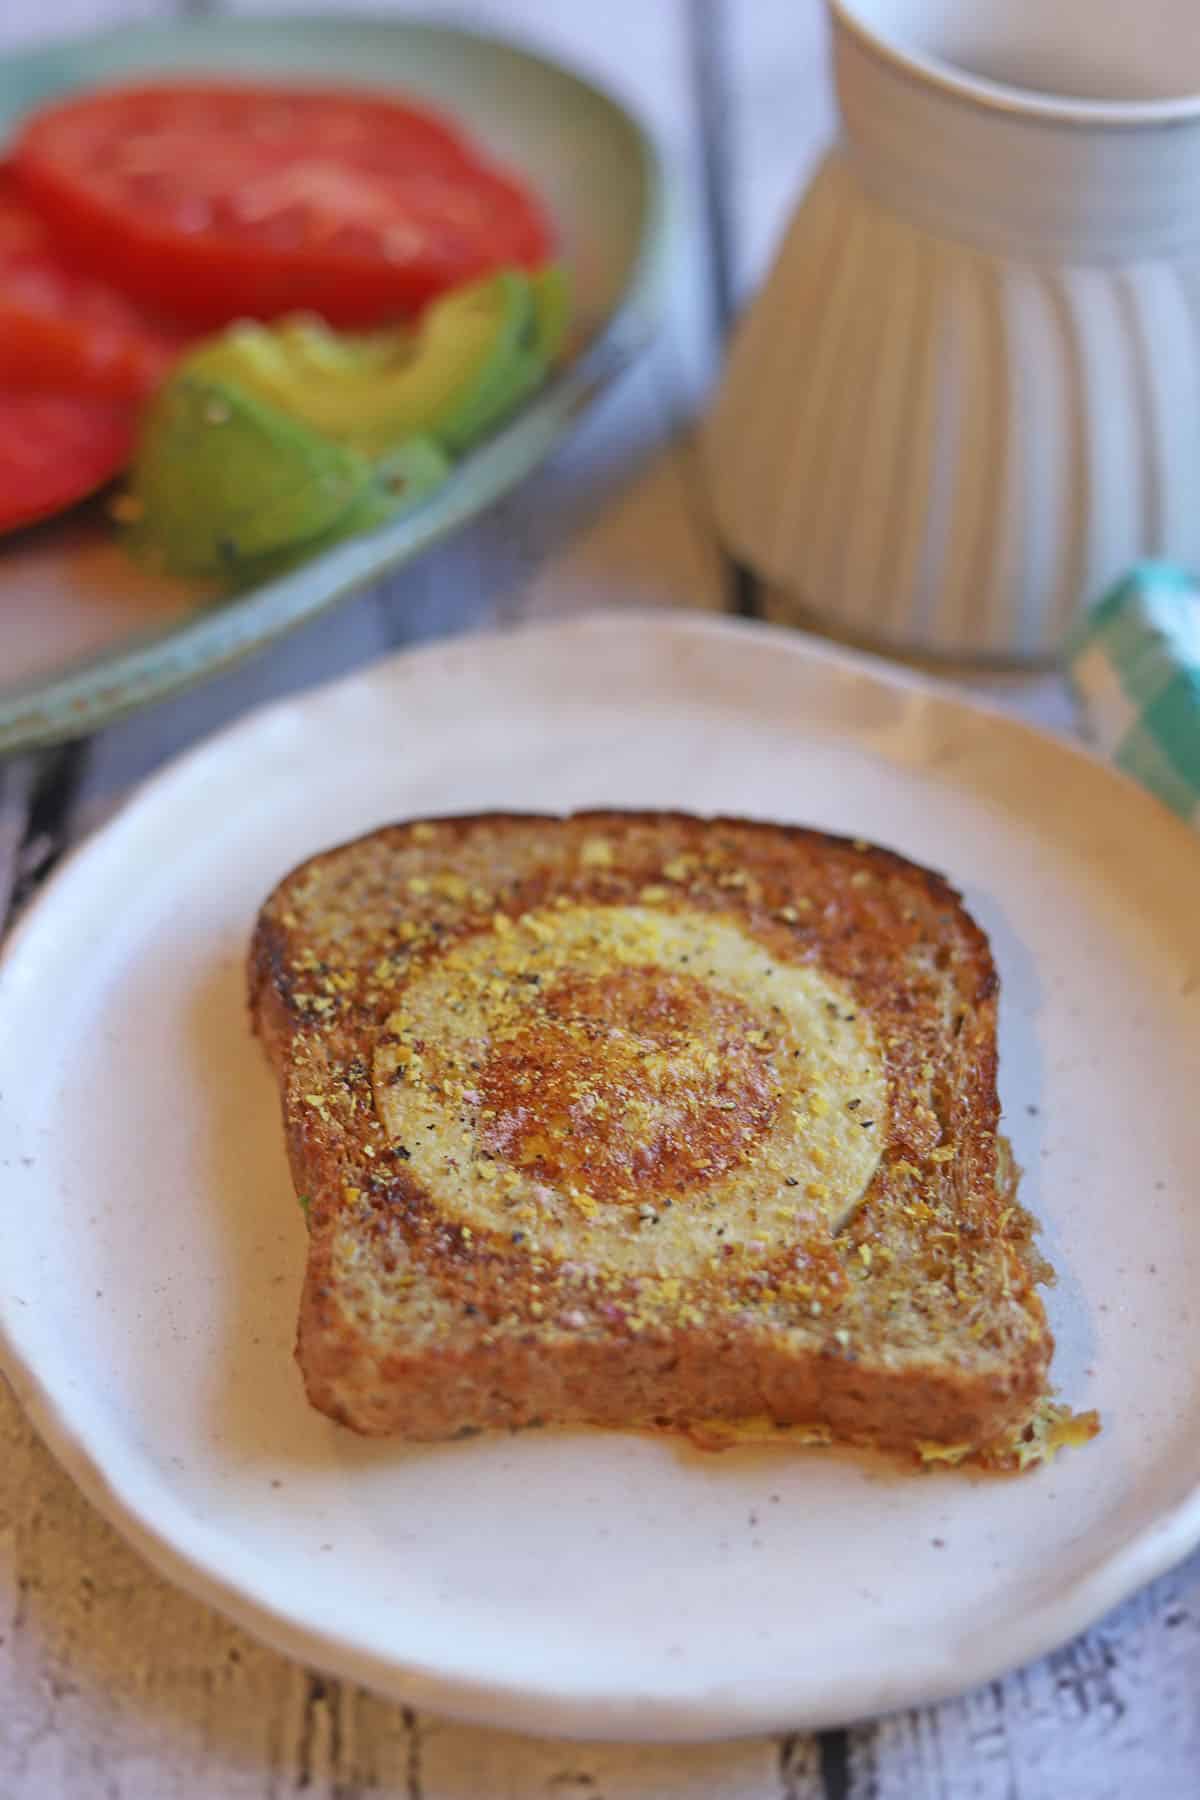 Fried vegan egg in toast by coffee cup.